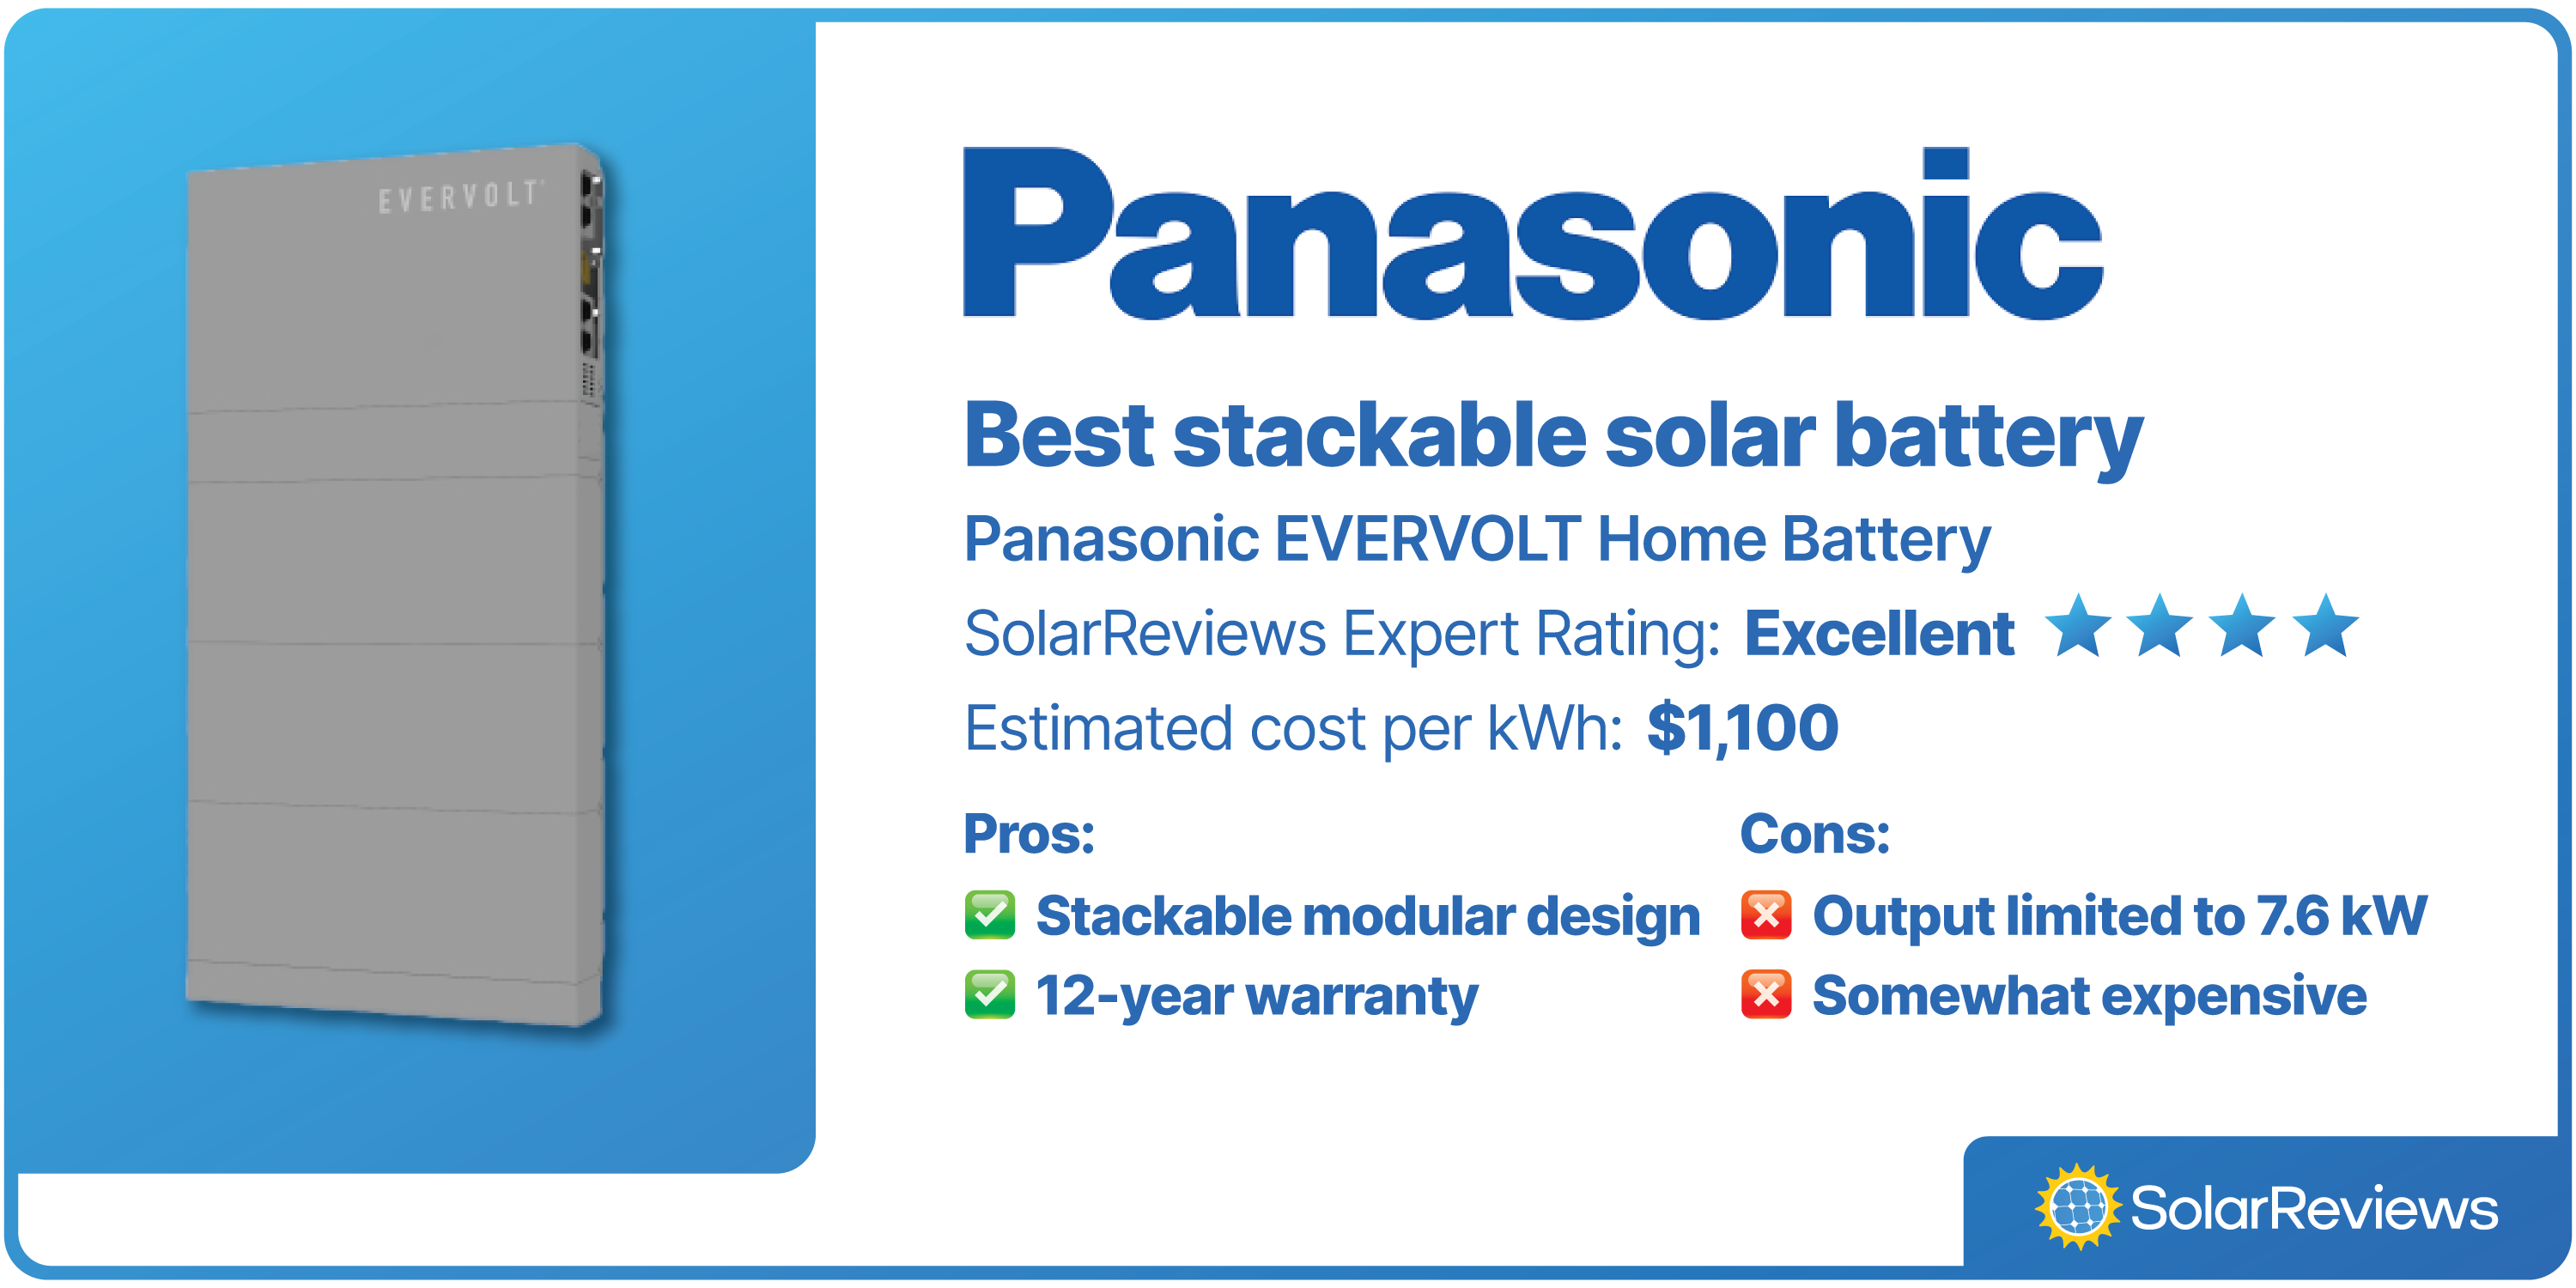 Panasonic EverVolt was voted best stackable solar battery, with a SolarReviews rating of Excellent (4 stars), and estimated cost per kWh of $1,100.